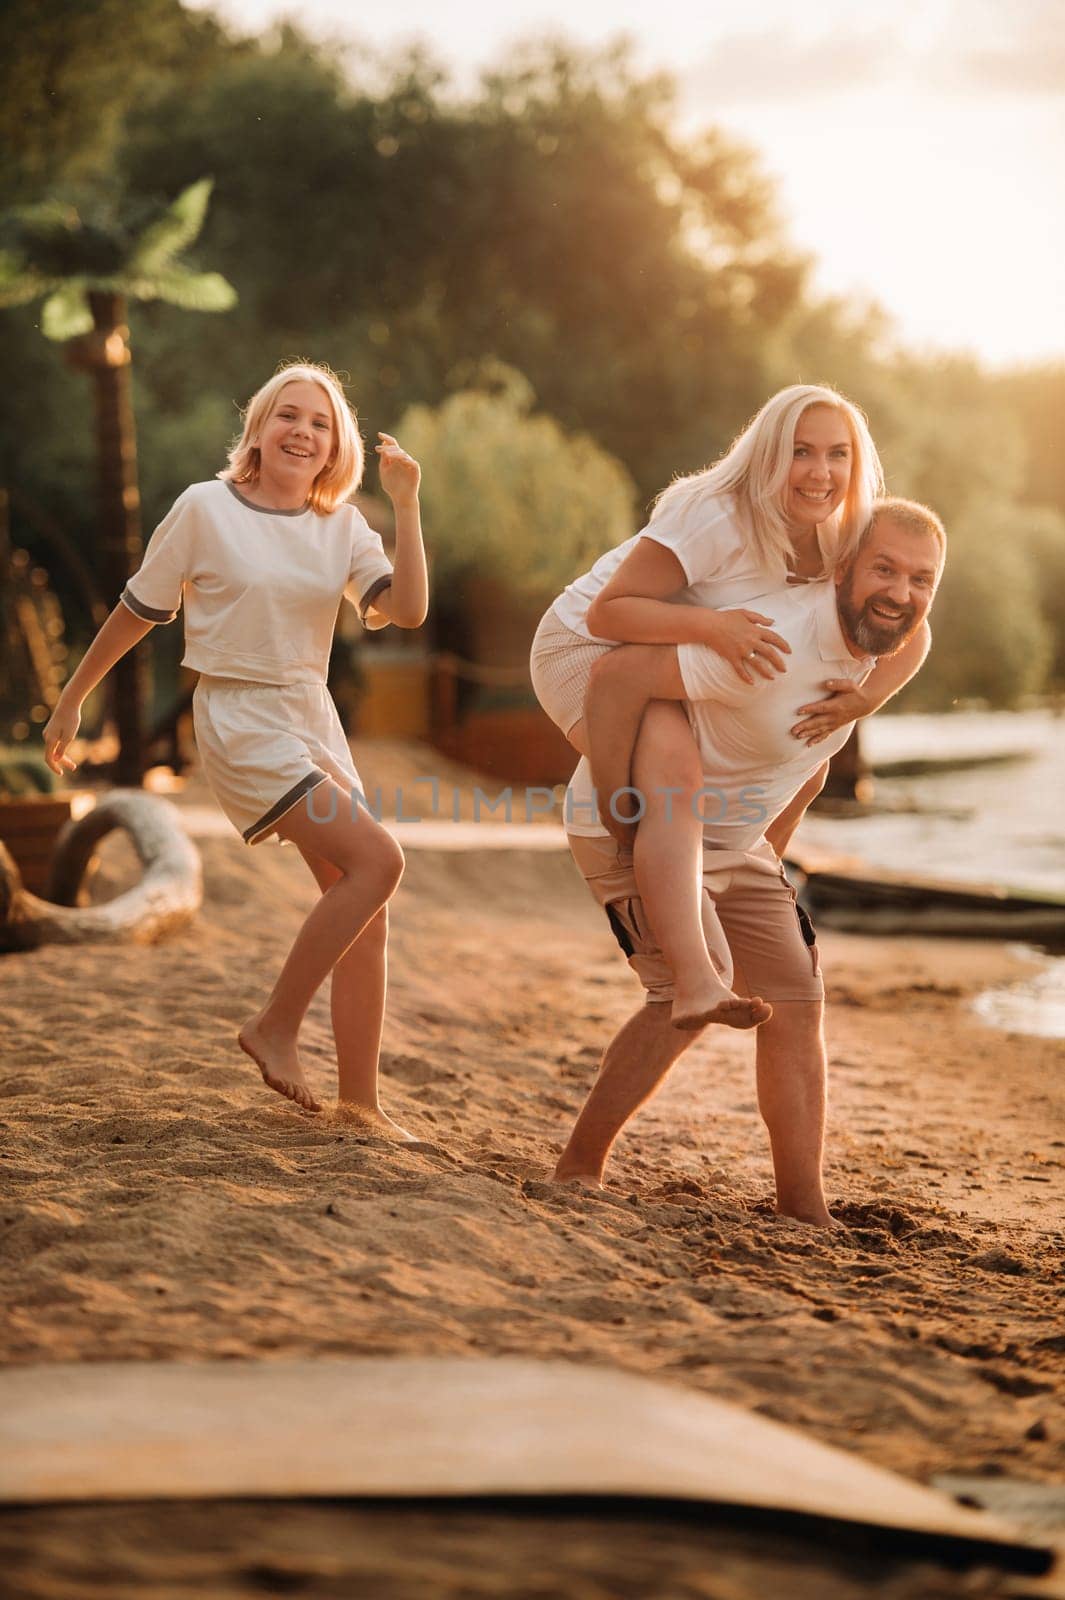 Happy family - father, mother and daughter in light clothes having fun together on the beach in summer.